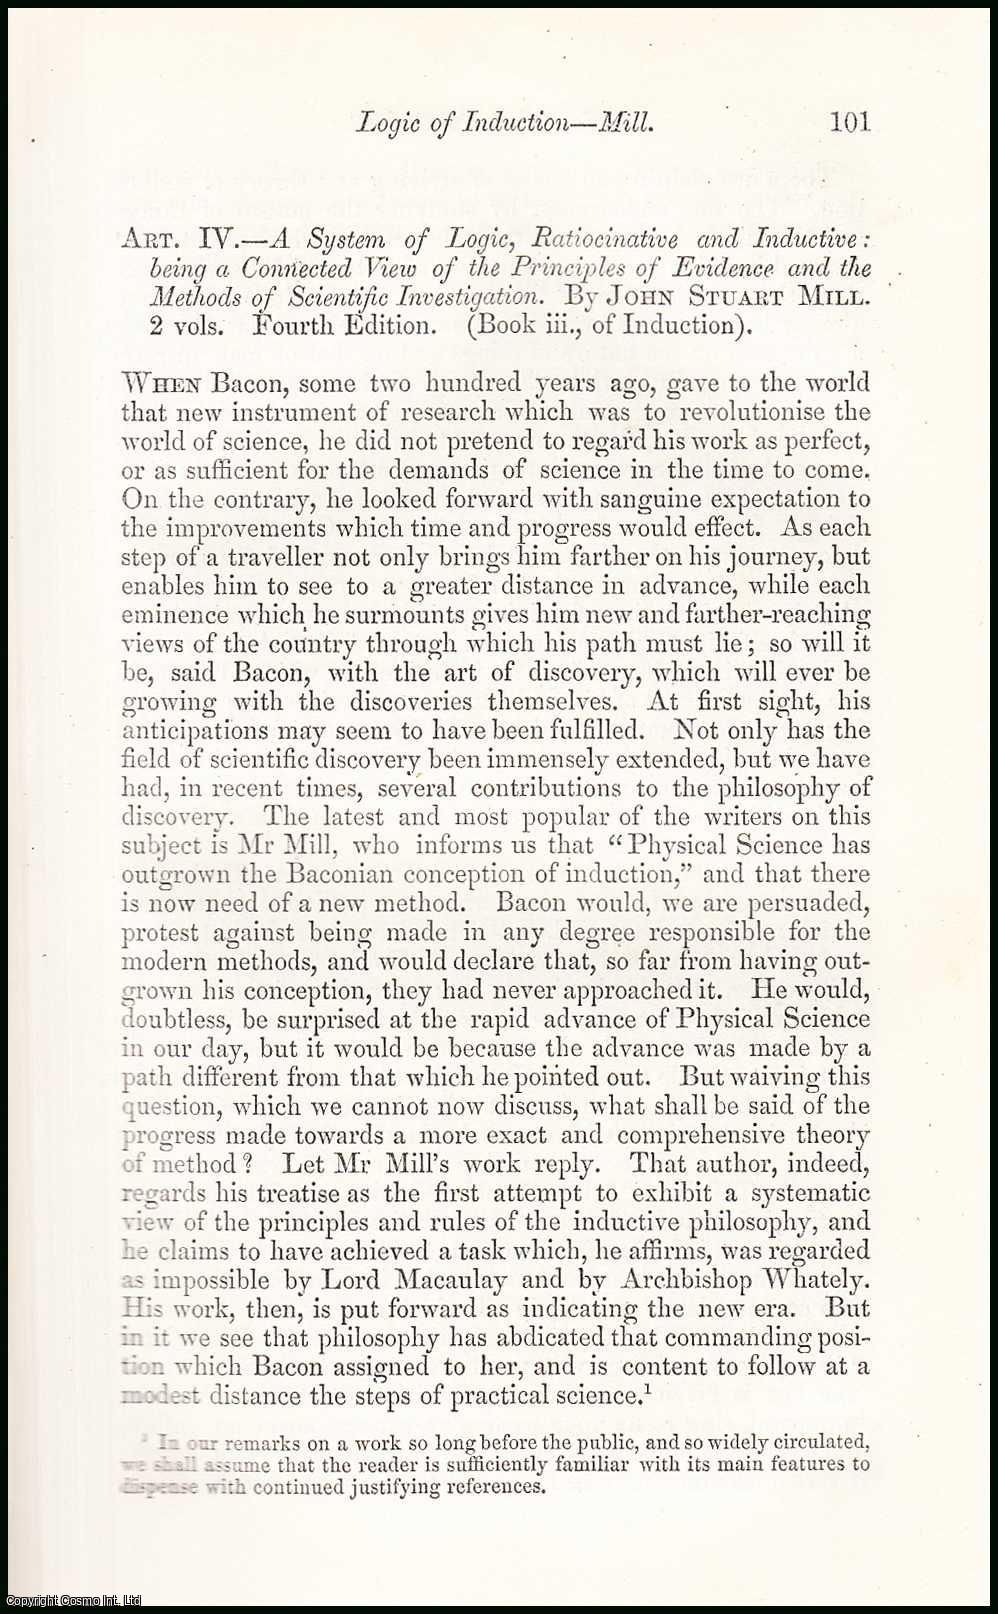 Thomas K. Abbott - Logic of Induction. An uncommon original article from the North British Review, 1858.